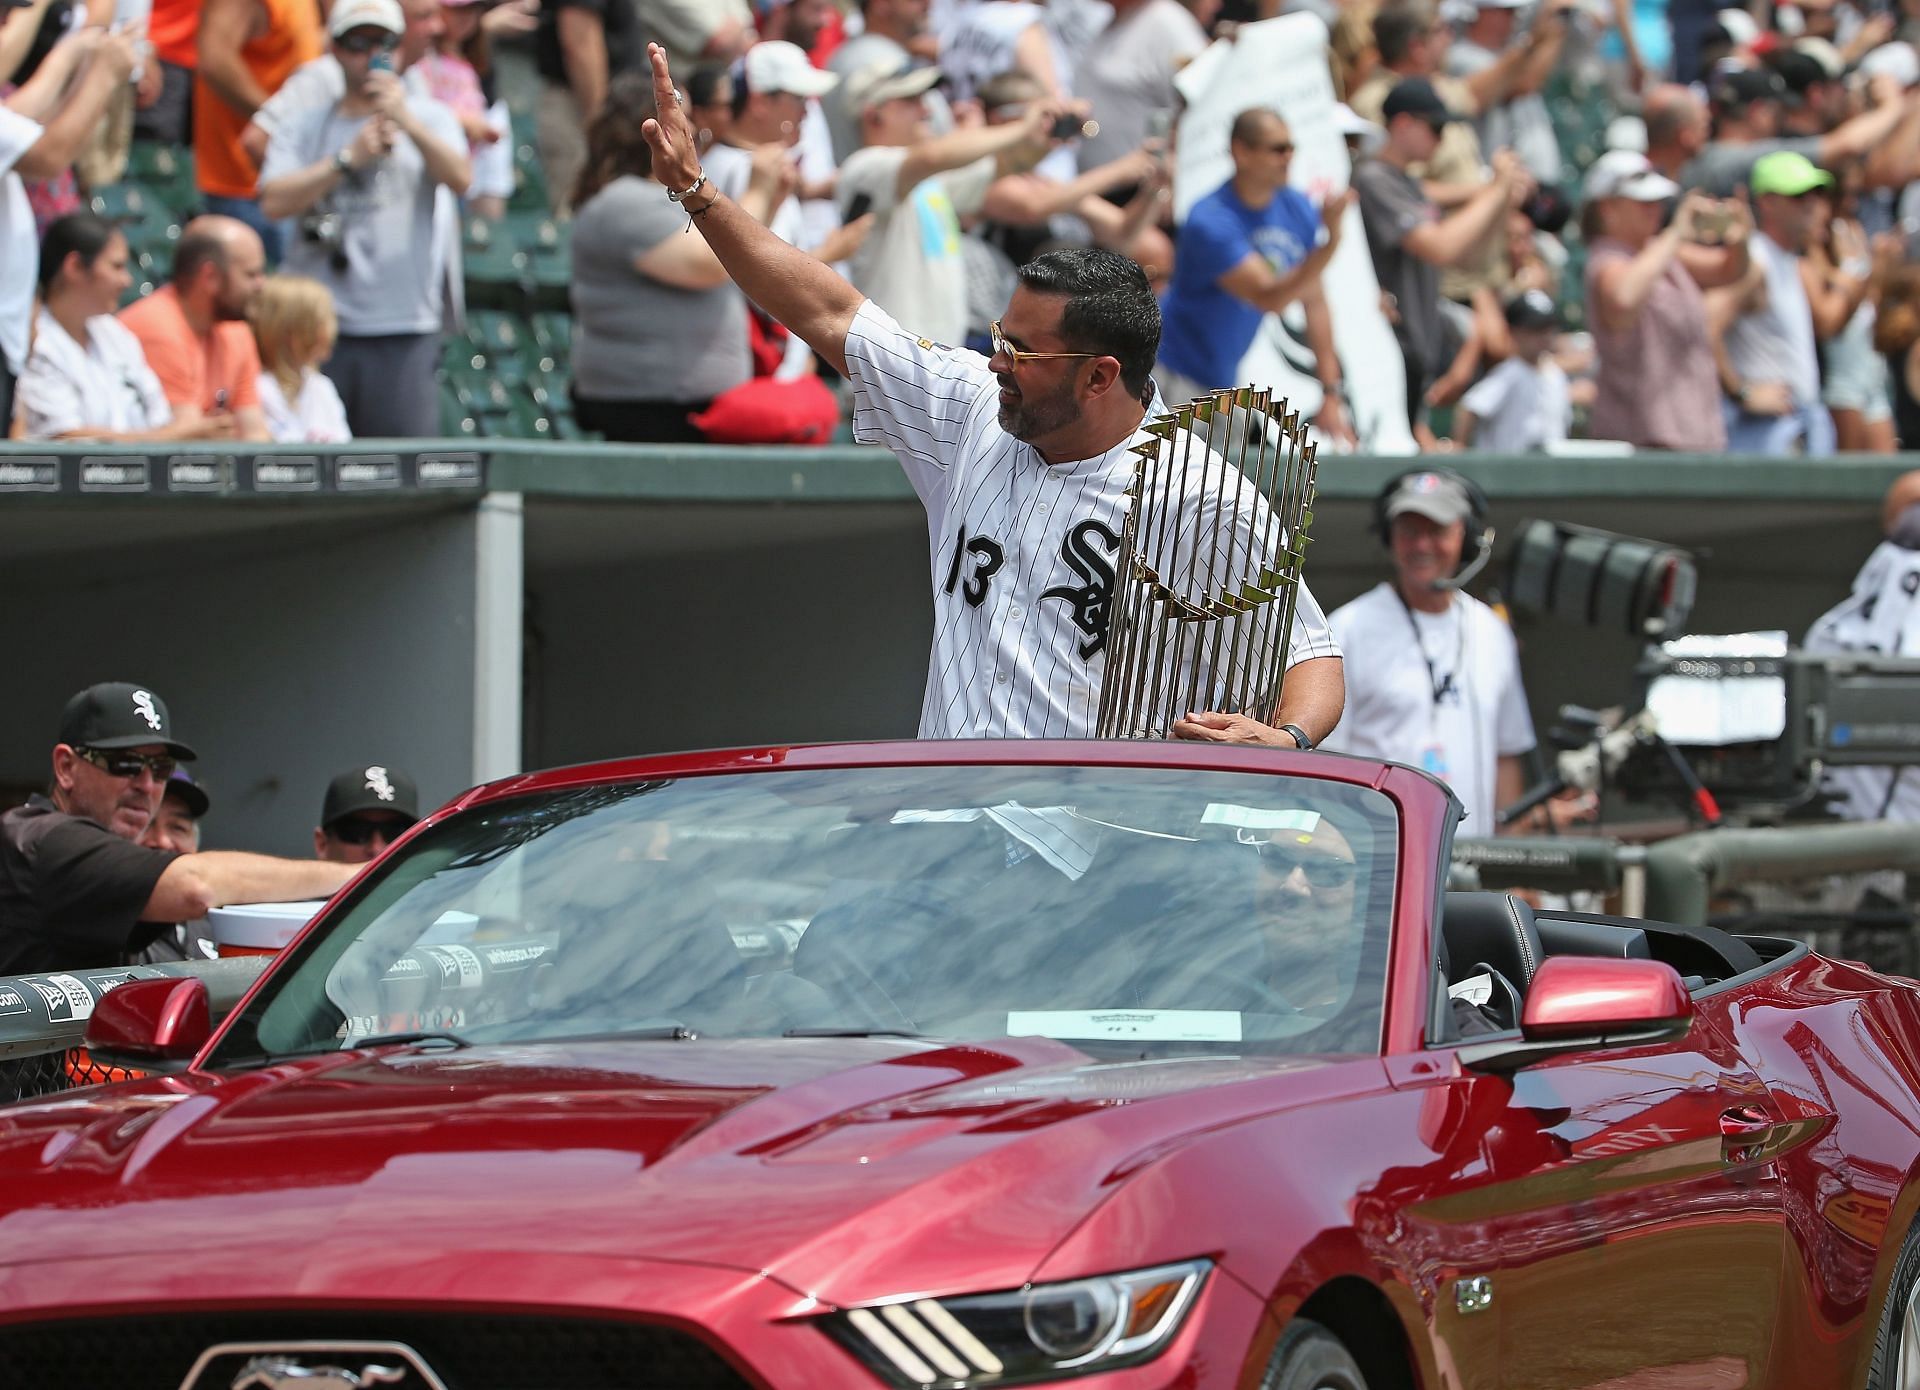 Former manager Ozzie Gullien of the Chicago White Sox greets the crowd as he rides in with the World Series trophy for a ceremony honoring the 10th anniversary of the 2005 World Series Champion Chicago White Sox team before a game against the Kansas City Royals at U.S. Cellular Field on July 18, 2015 in Chicago, Illinois.